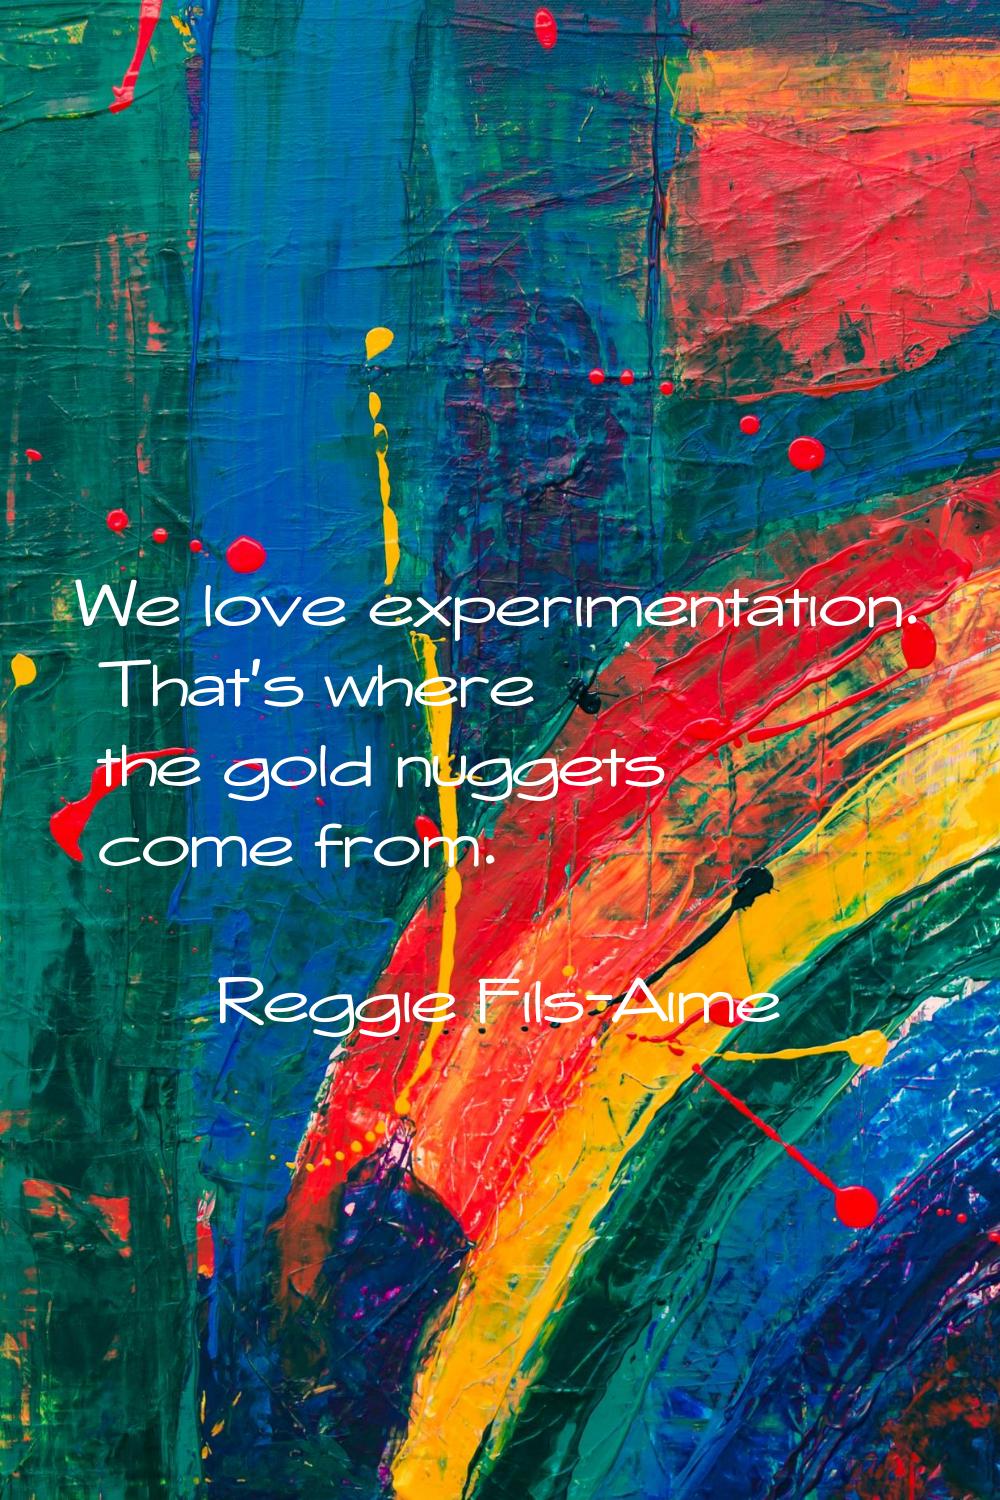 We love experimentation. That's where the gold nuggets come from.